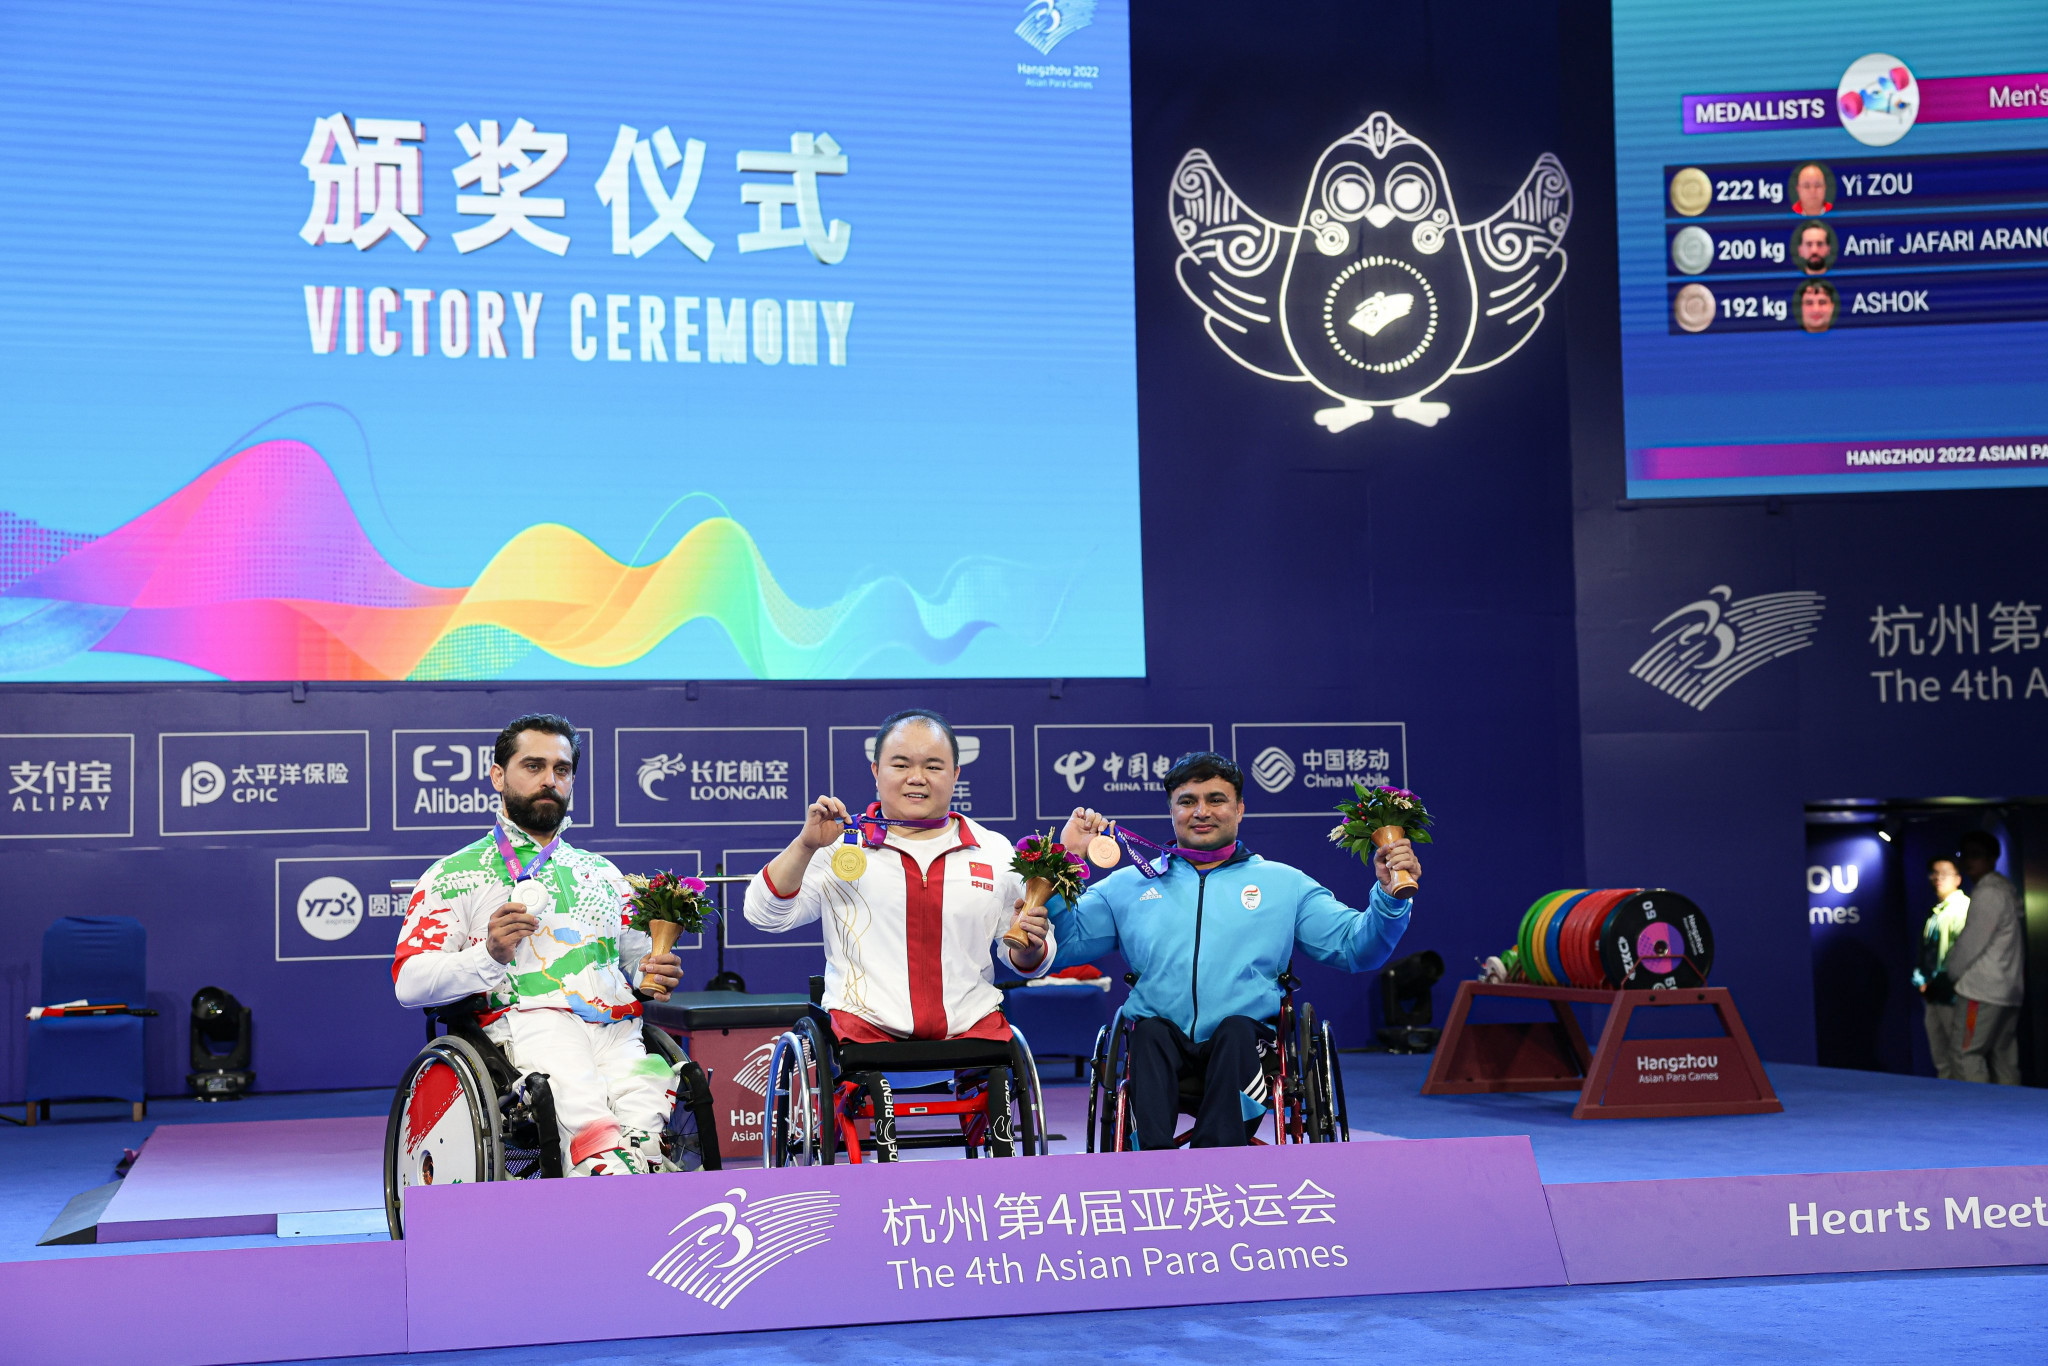 Chinese athletes won all four golds on offer in powerlifting, with one world record and three Games records ©Powerlifting/X